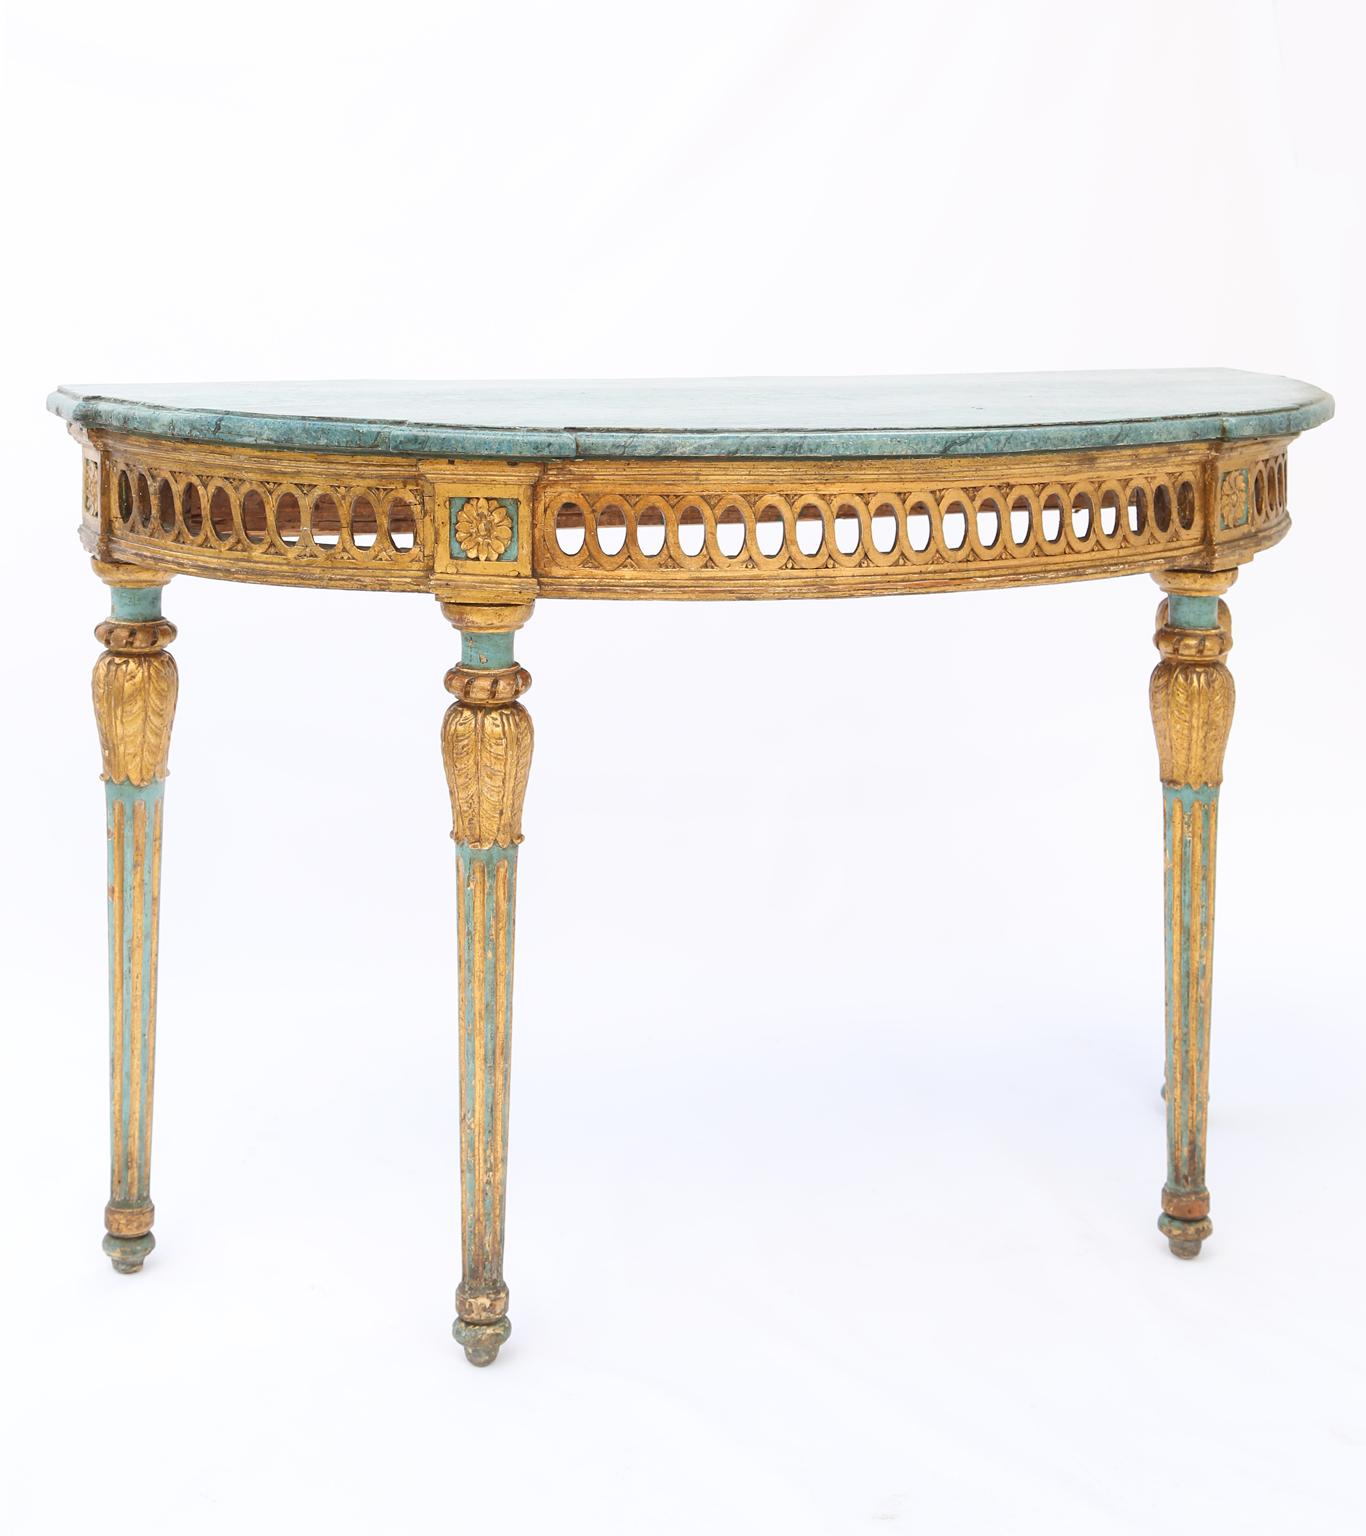 Demilune console, having a molded top, faux painted in robin's egg blue, its pierced, guilloche apron framed by rosette-blocks, raised on four, foliate-headed, round, tapering, and fluted legs, ending in touipe feet.

Stock ID: D2022.